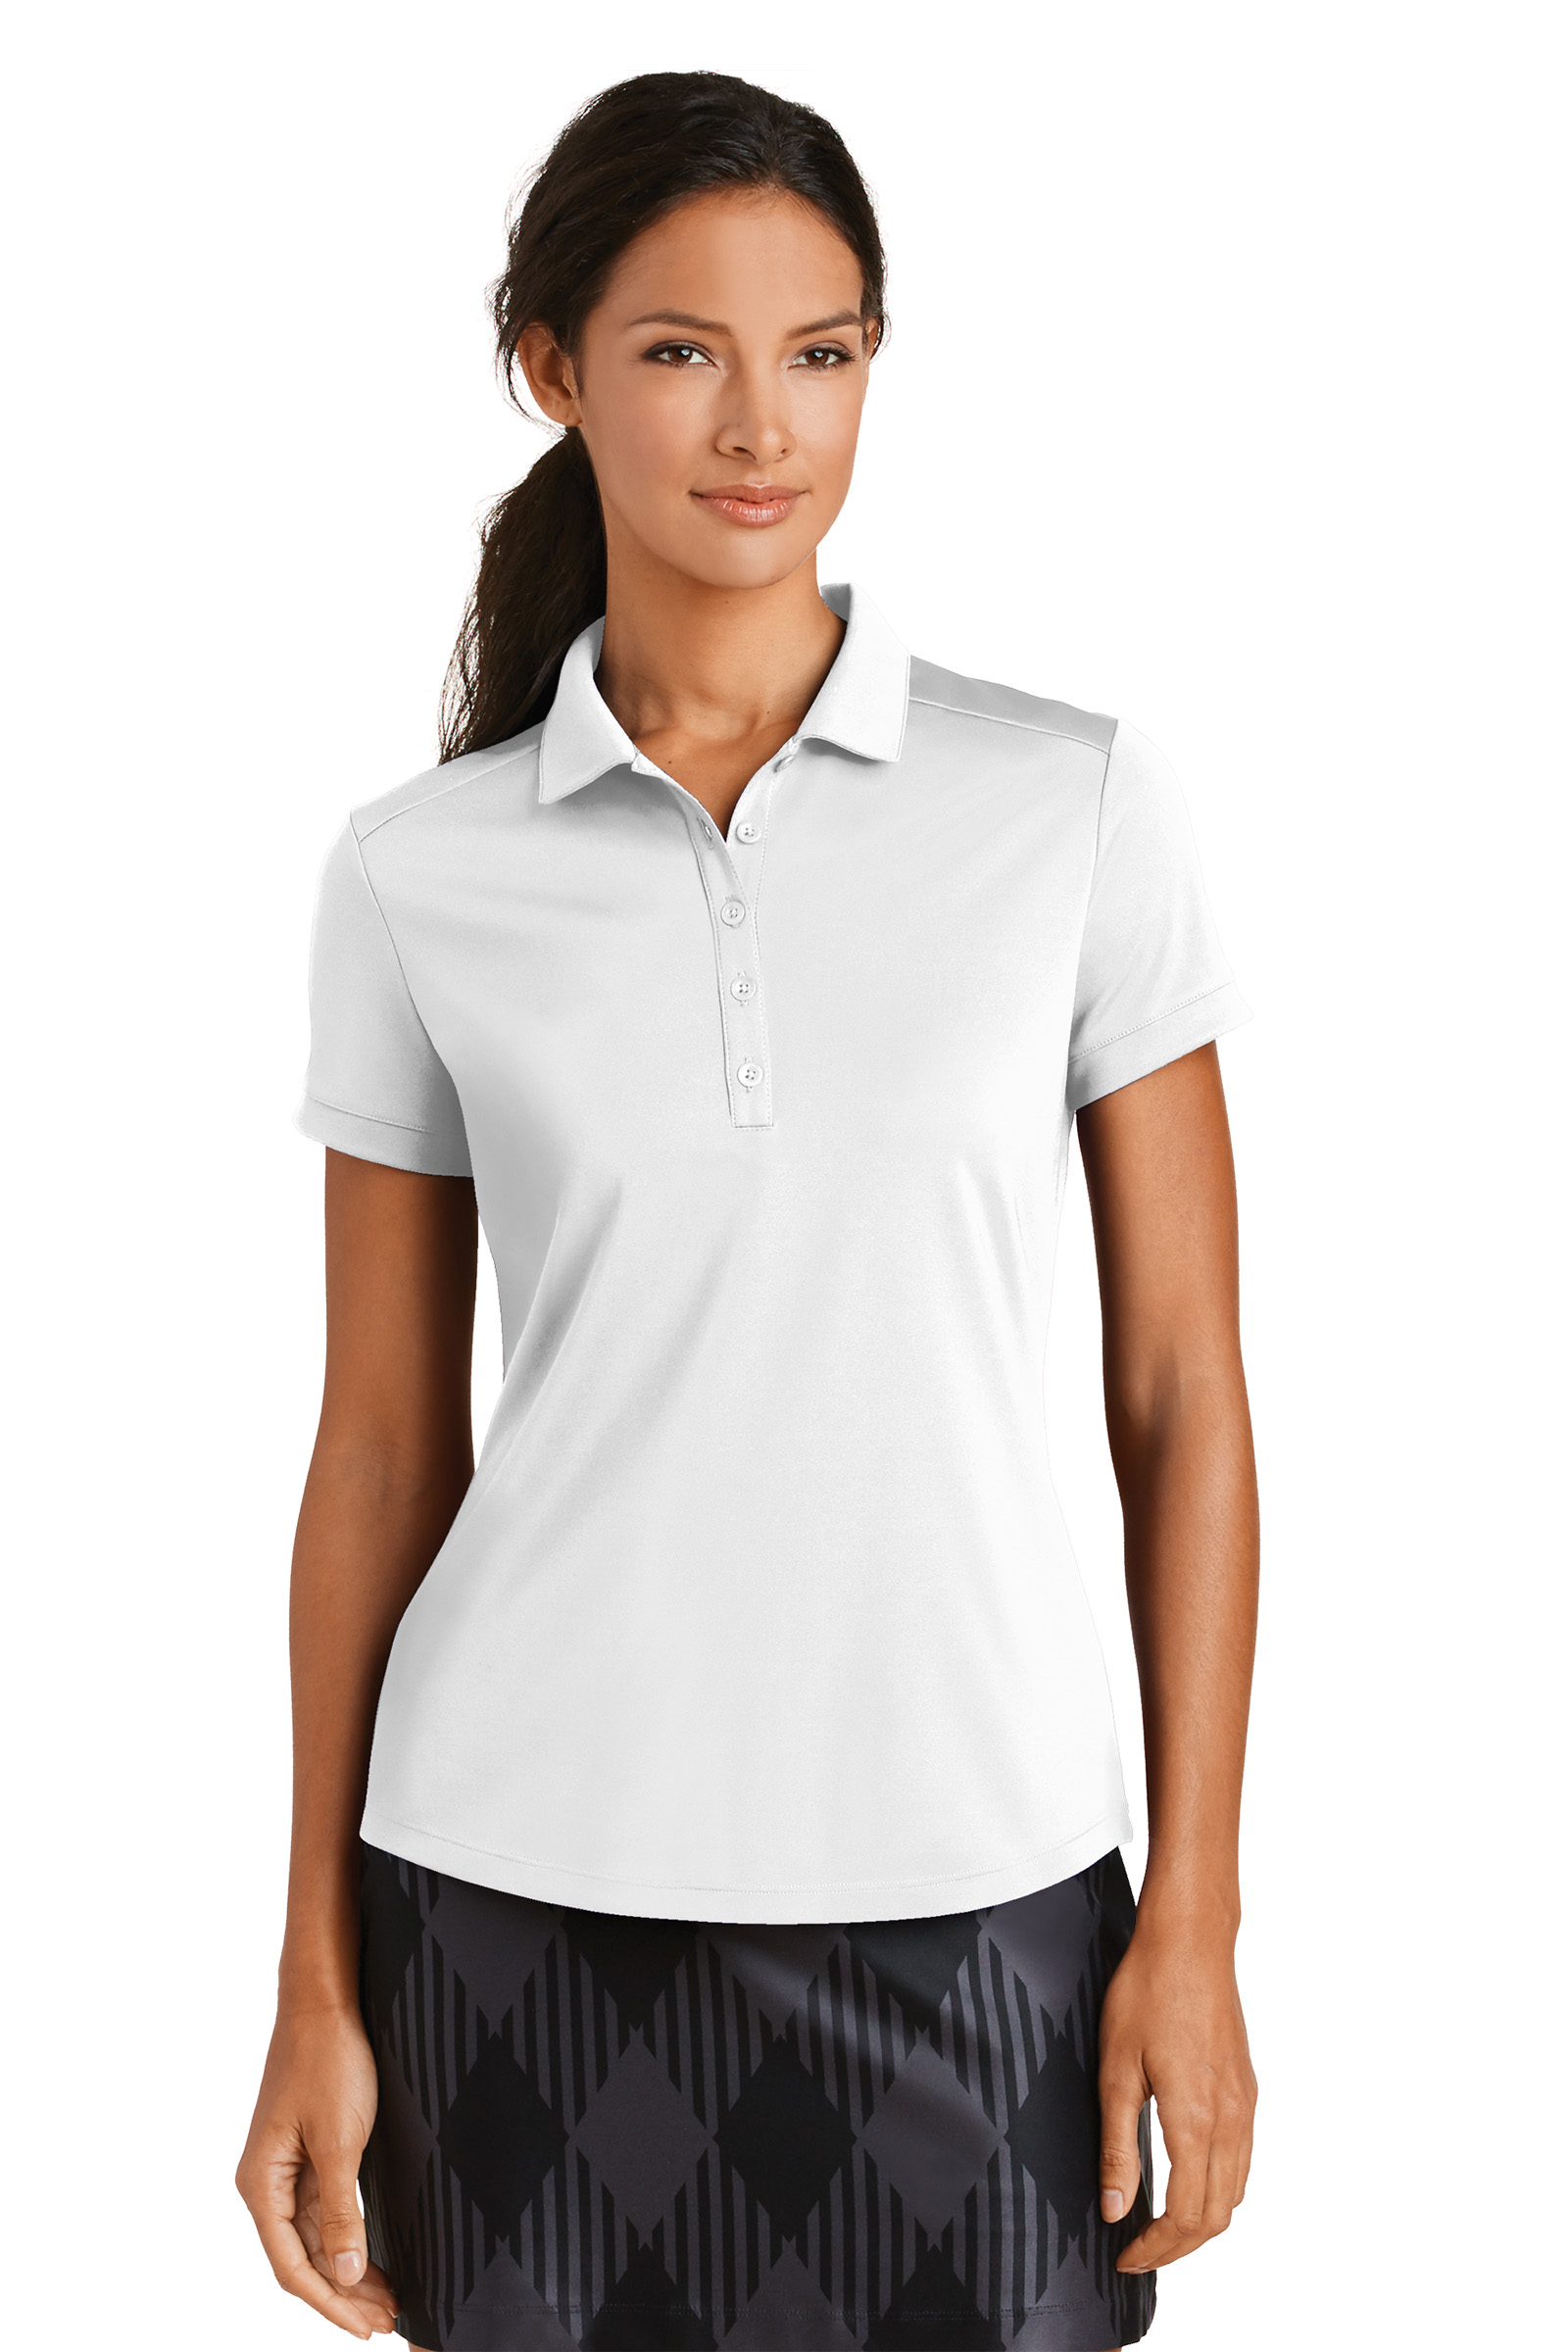 Nike Golf Embroidered Women's Dri-FIT Players Modern Fit Polo